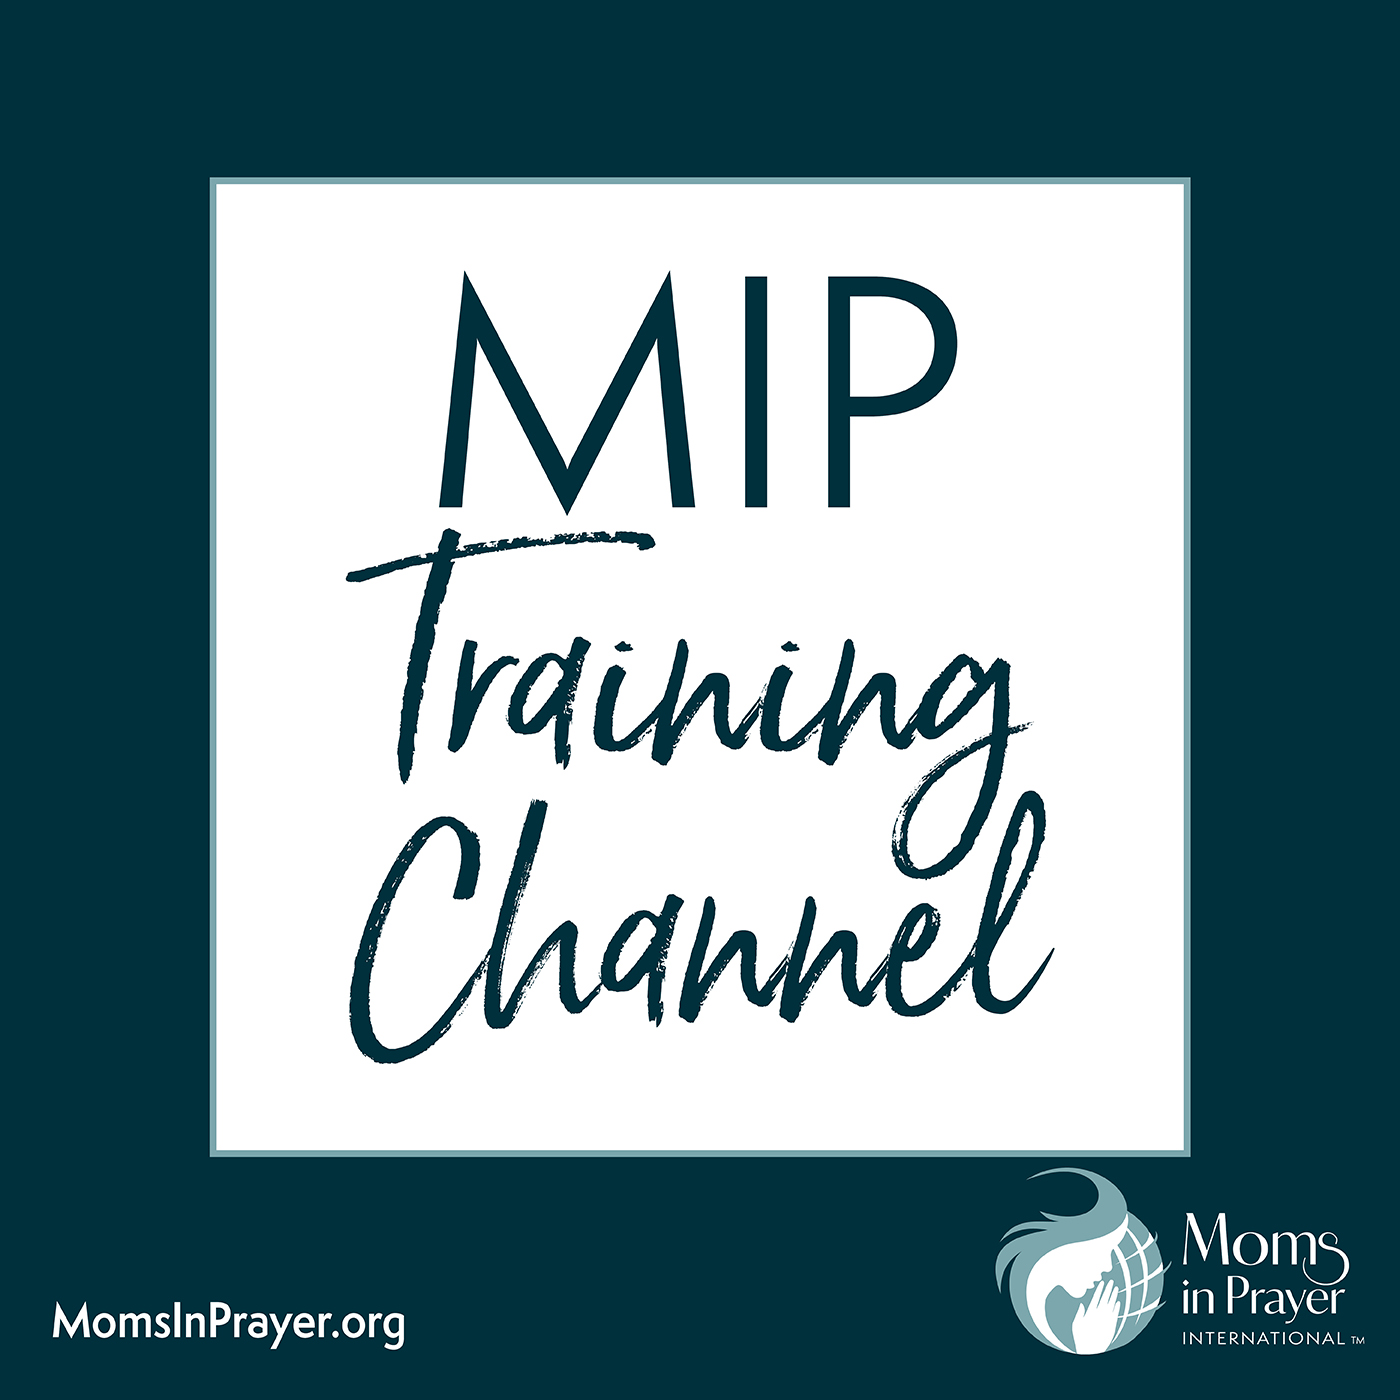 Moms in Prayer - The Training Channel